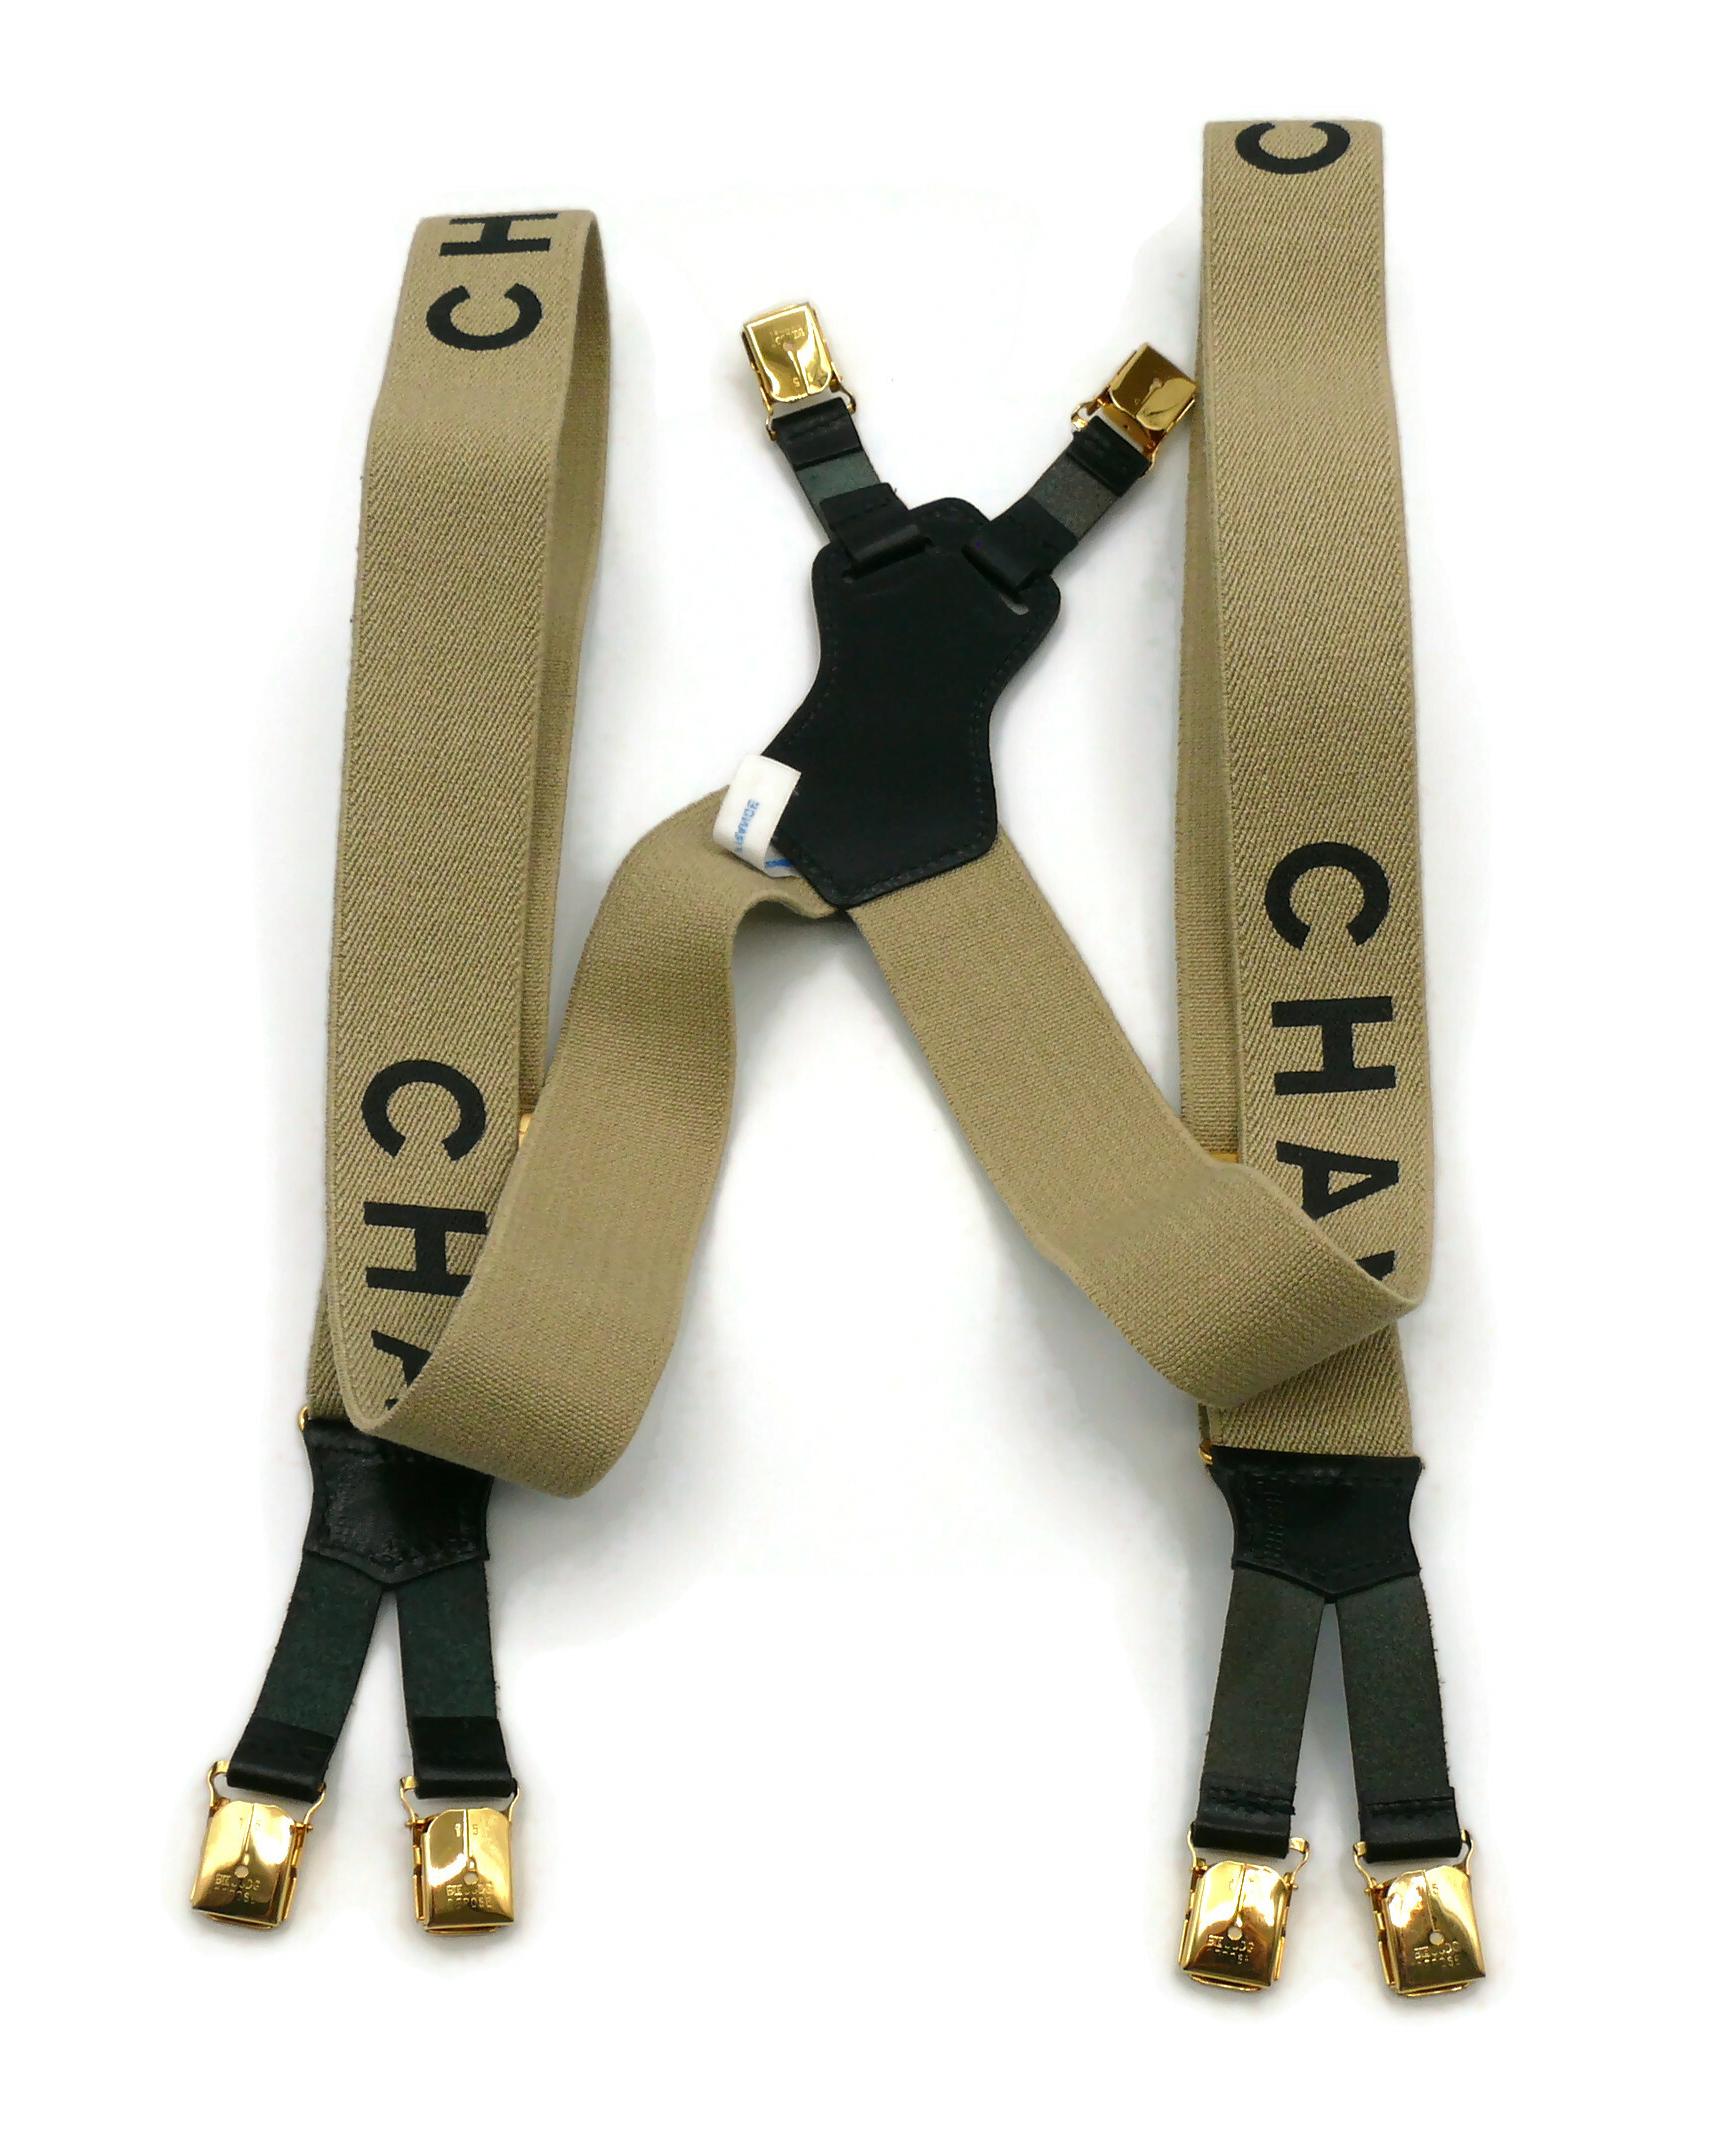 CHANEL by KARL LAGERFELD Vintage Iconic Light Brown and Black Suspenders, 1994 For Sale 8